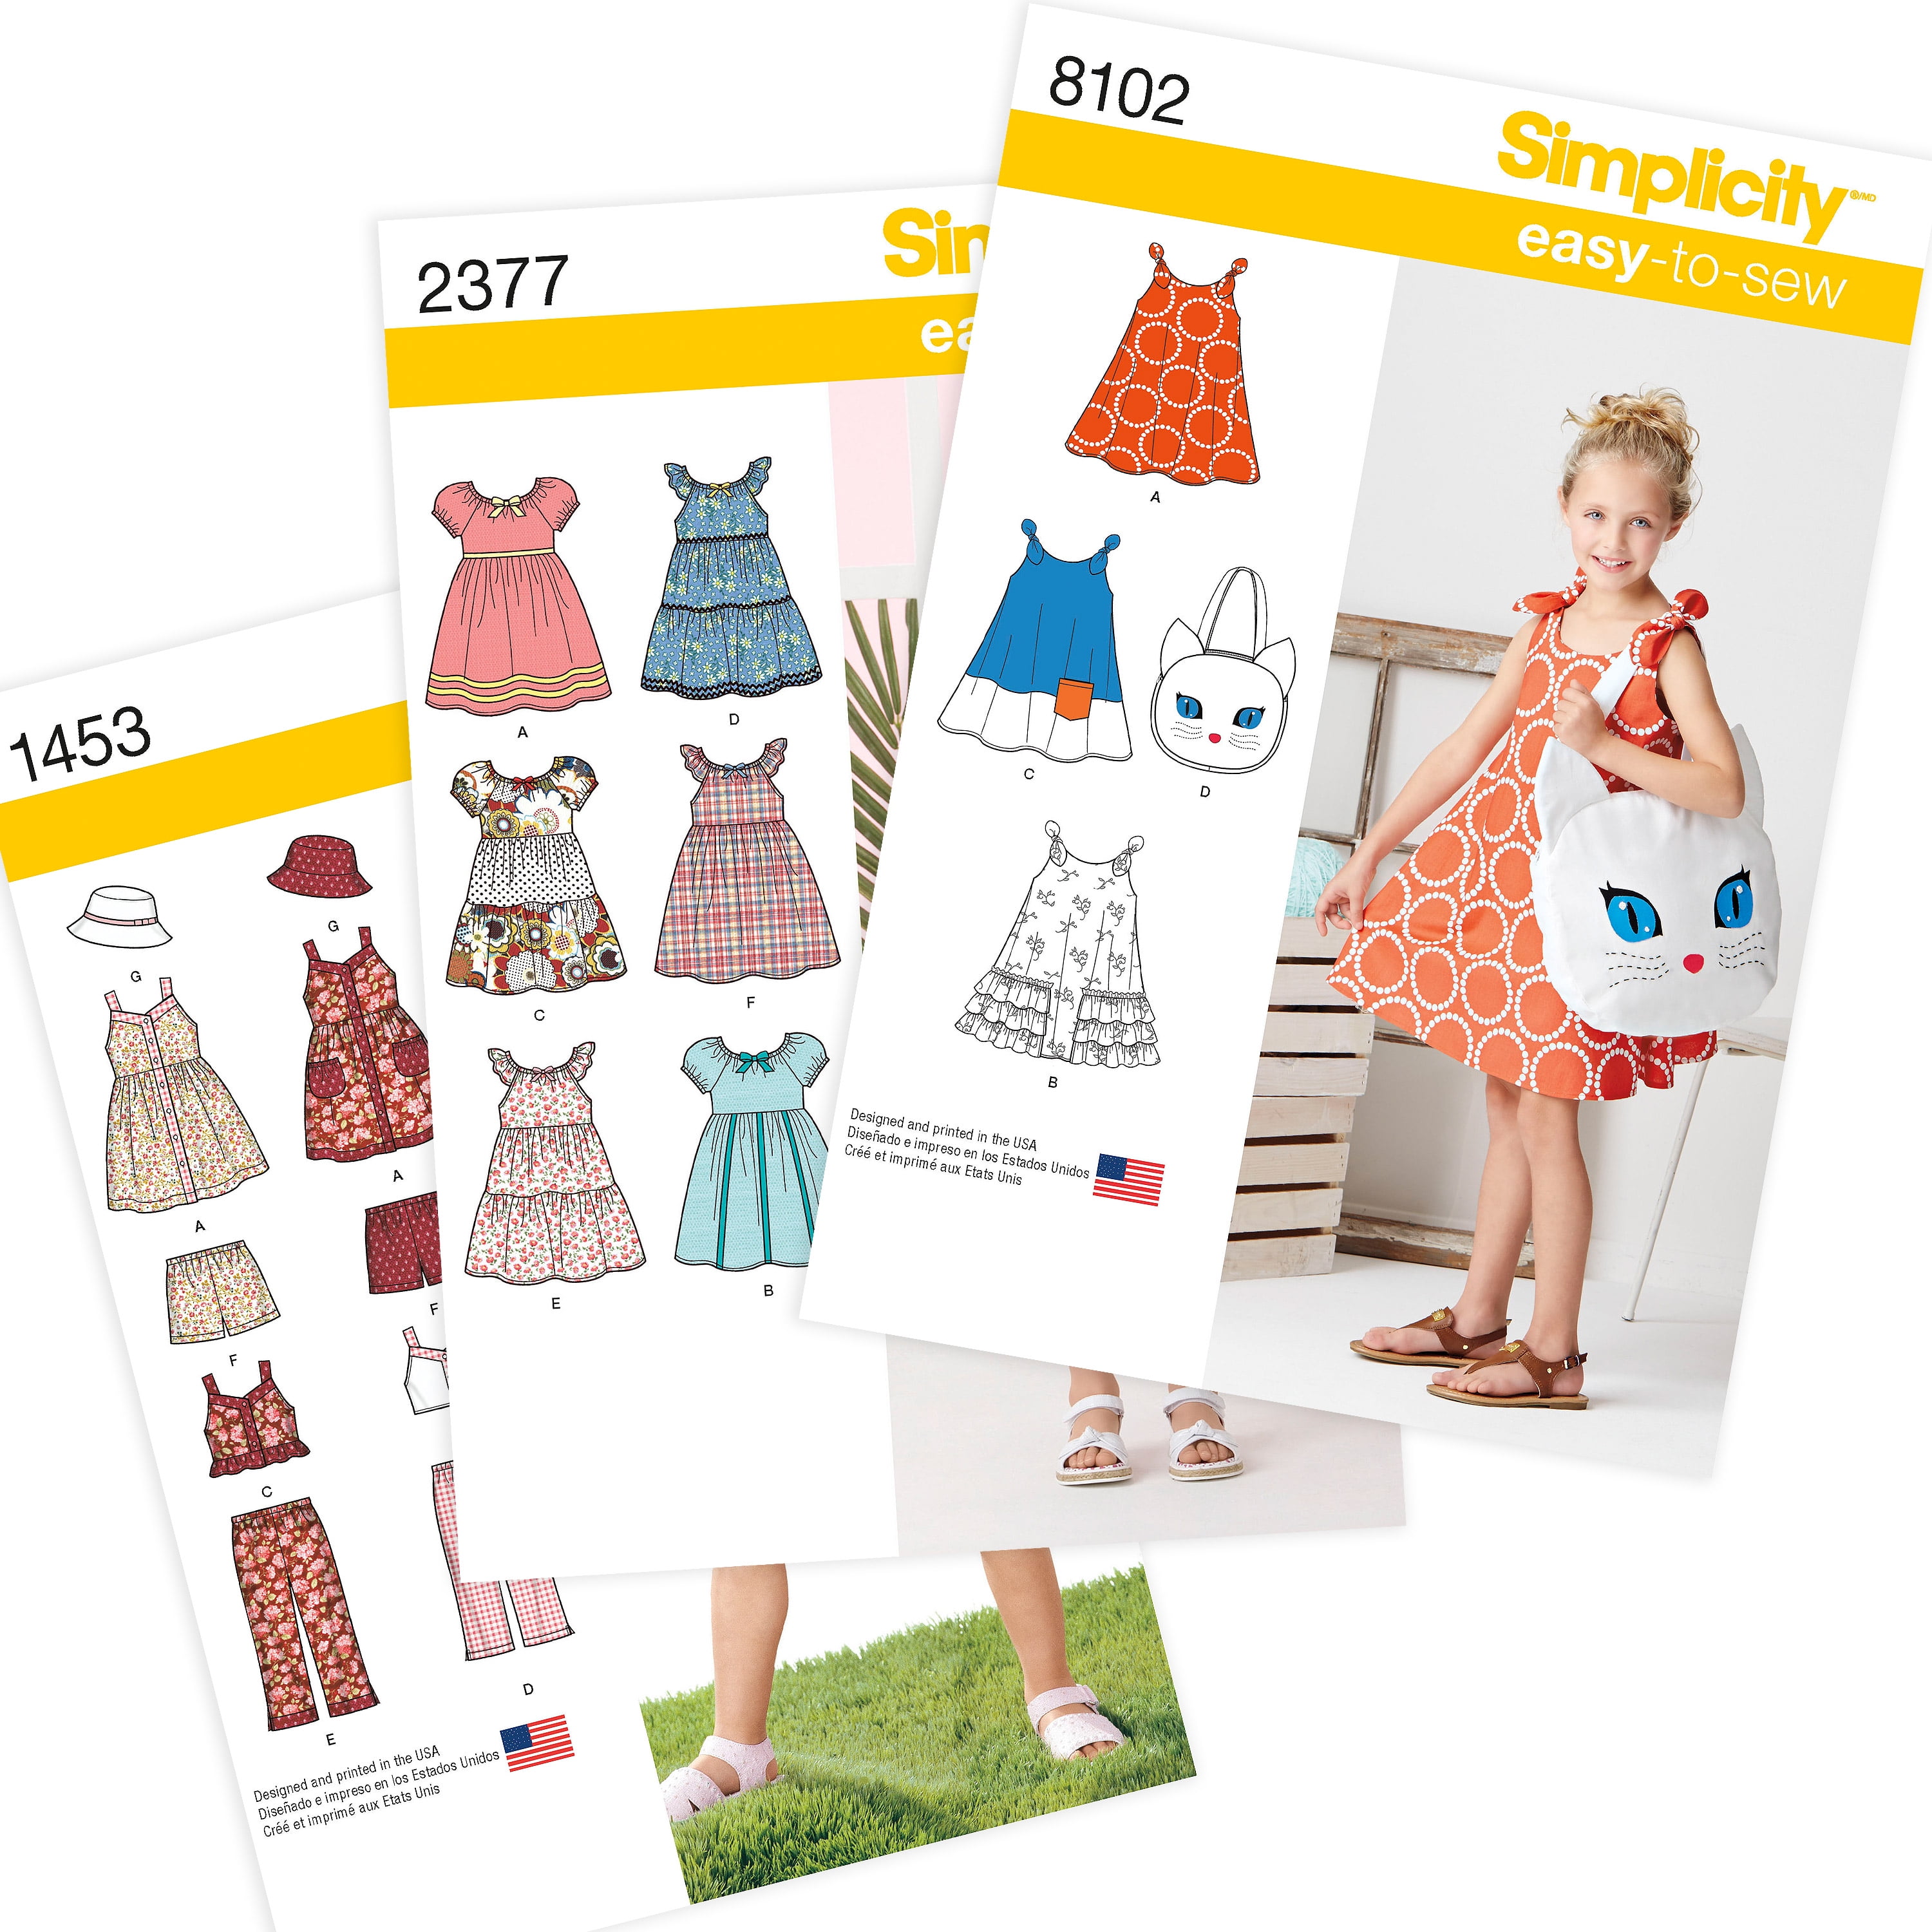 Your Choice Butterick Sewing Patterns Women's Dresses McCall's Simplicity 